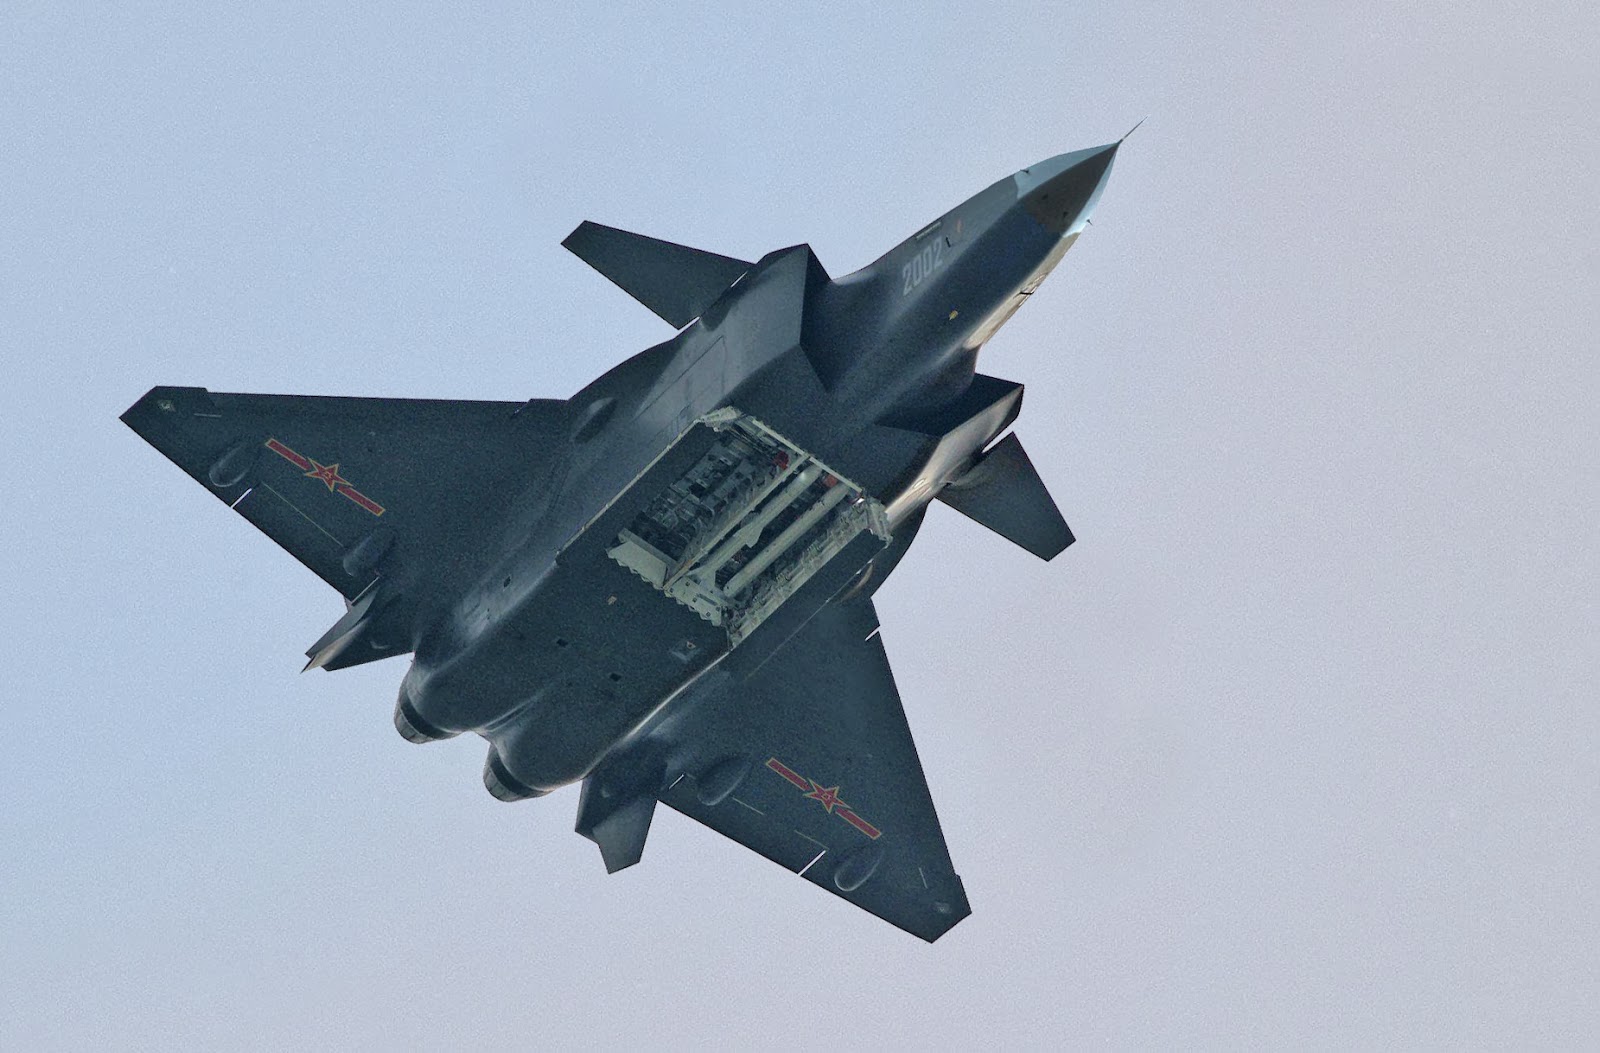 Más detalles del Chengdu J-20 - Página 12 J-20+2002+-+23.9.13+open+MAIN+SIDE+bay+2+PL-12+PL-10+PL-15+J-20+Mighty+Dragon++Chengdu+J-20+fifth+generation+stealth%252C+engine+fighter+People%2527s+Liberation+Army+Air+Force++OPERATIONAL+weapons+aam+bvr+missile+ls+pgm+gps+pla+%25283%2529